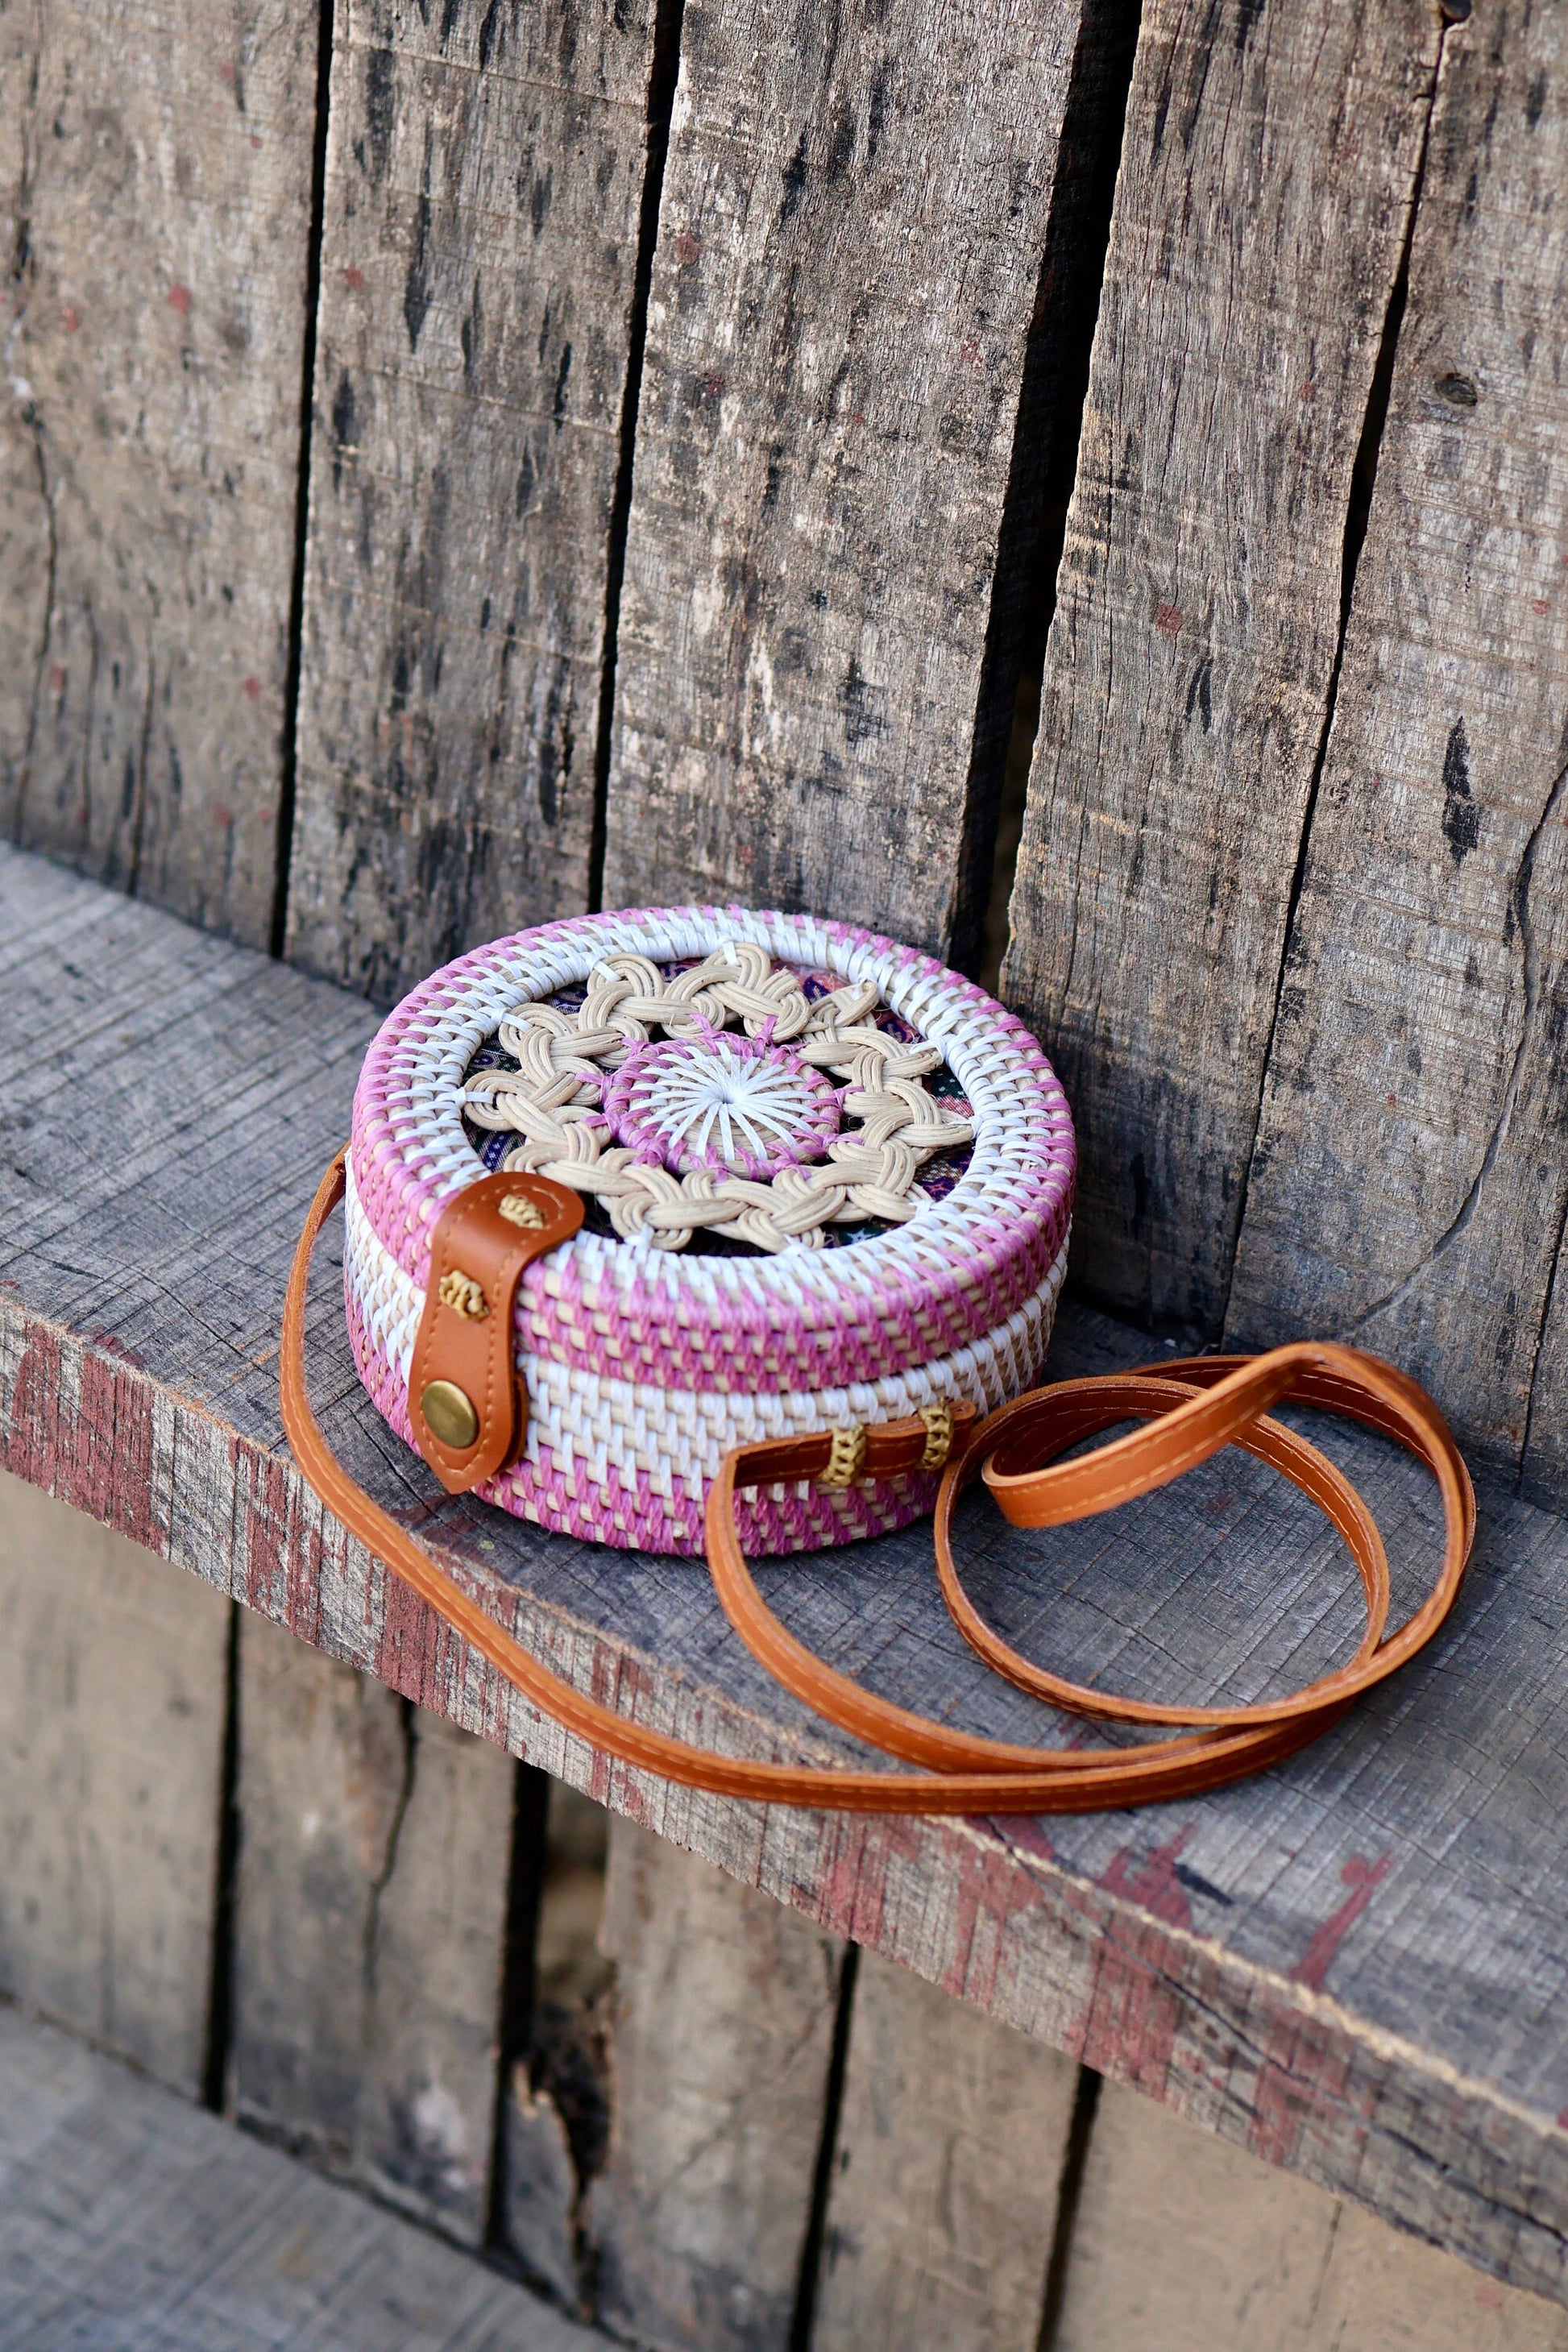 Pink Round Rattan Bag with Braid Pattern, Bali Bags, Handwoven Crossbody Purse, Braided Straw Bag, Bali Sling Bags Rattan Bags Gift for her